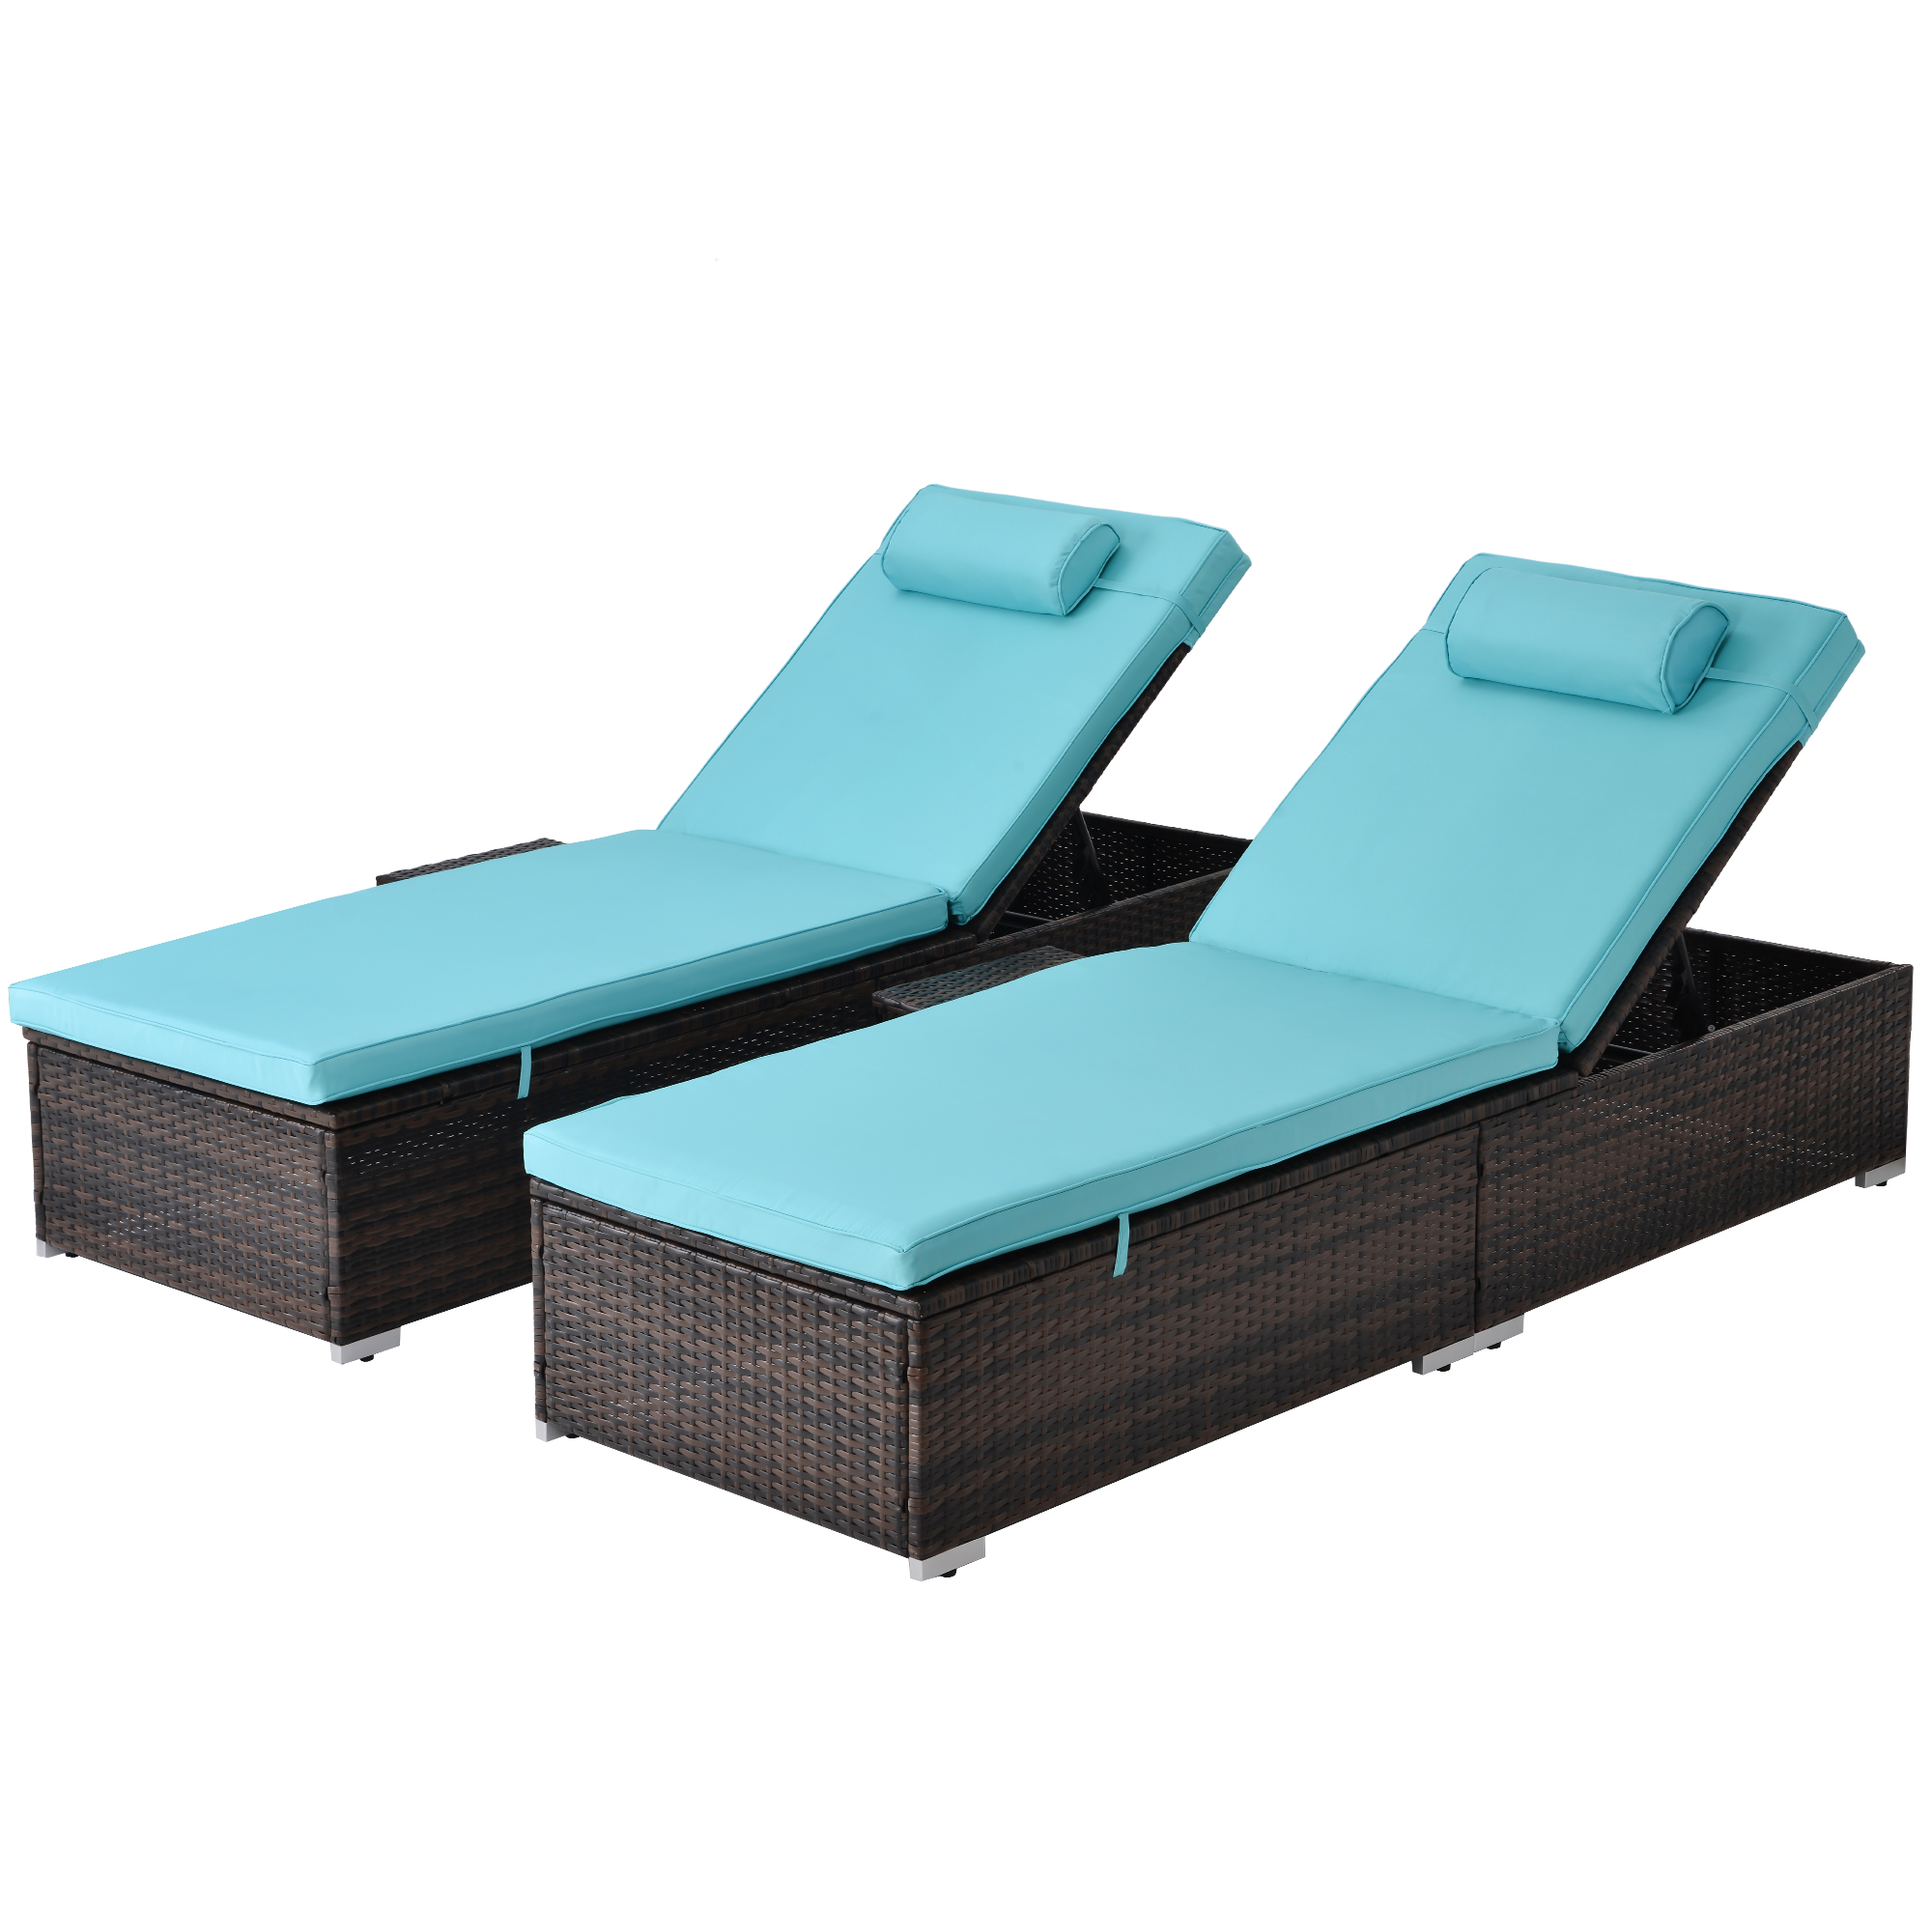 SYNGAR 2 PCS Patio Furniture Outdoor Patio Lounge Chairs, Adjustable Reclining Chair, Lawn Poolside Chaise Lounge Chair, PE Rattan Patio Seating with Side Table, Comfort Head Pillow, Brown & Blue - image 5 of 10